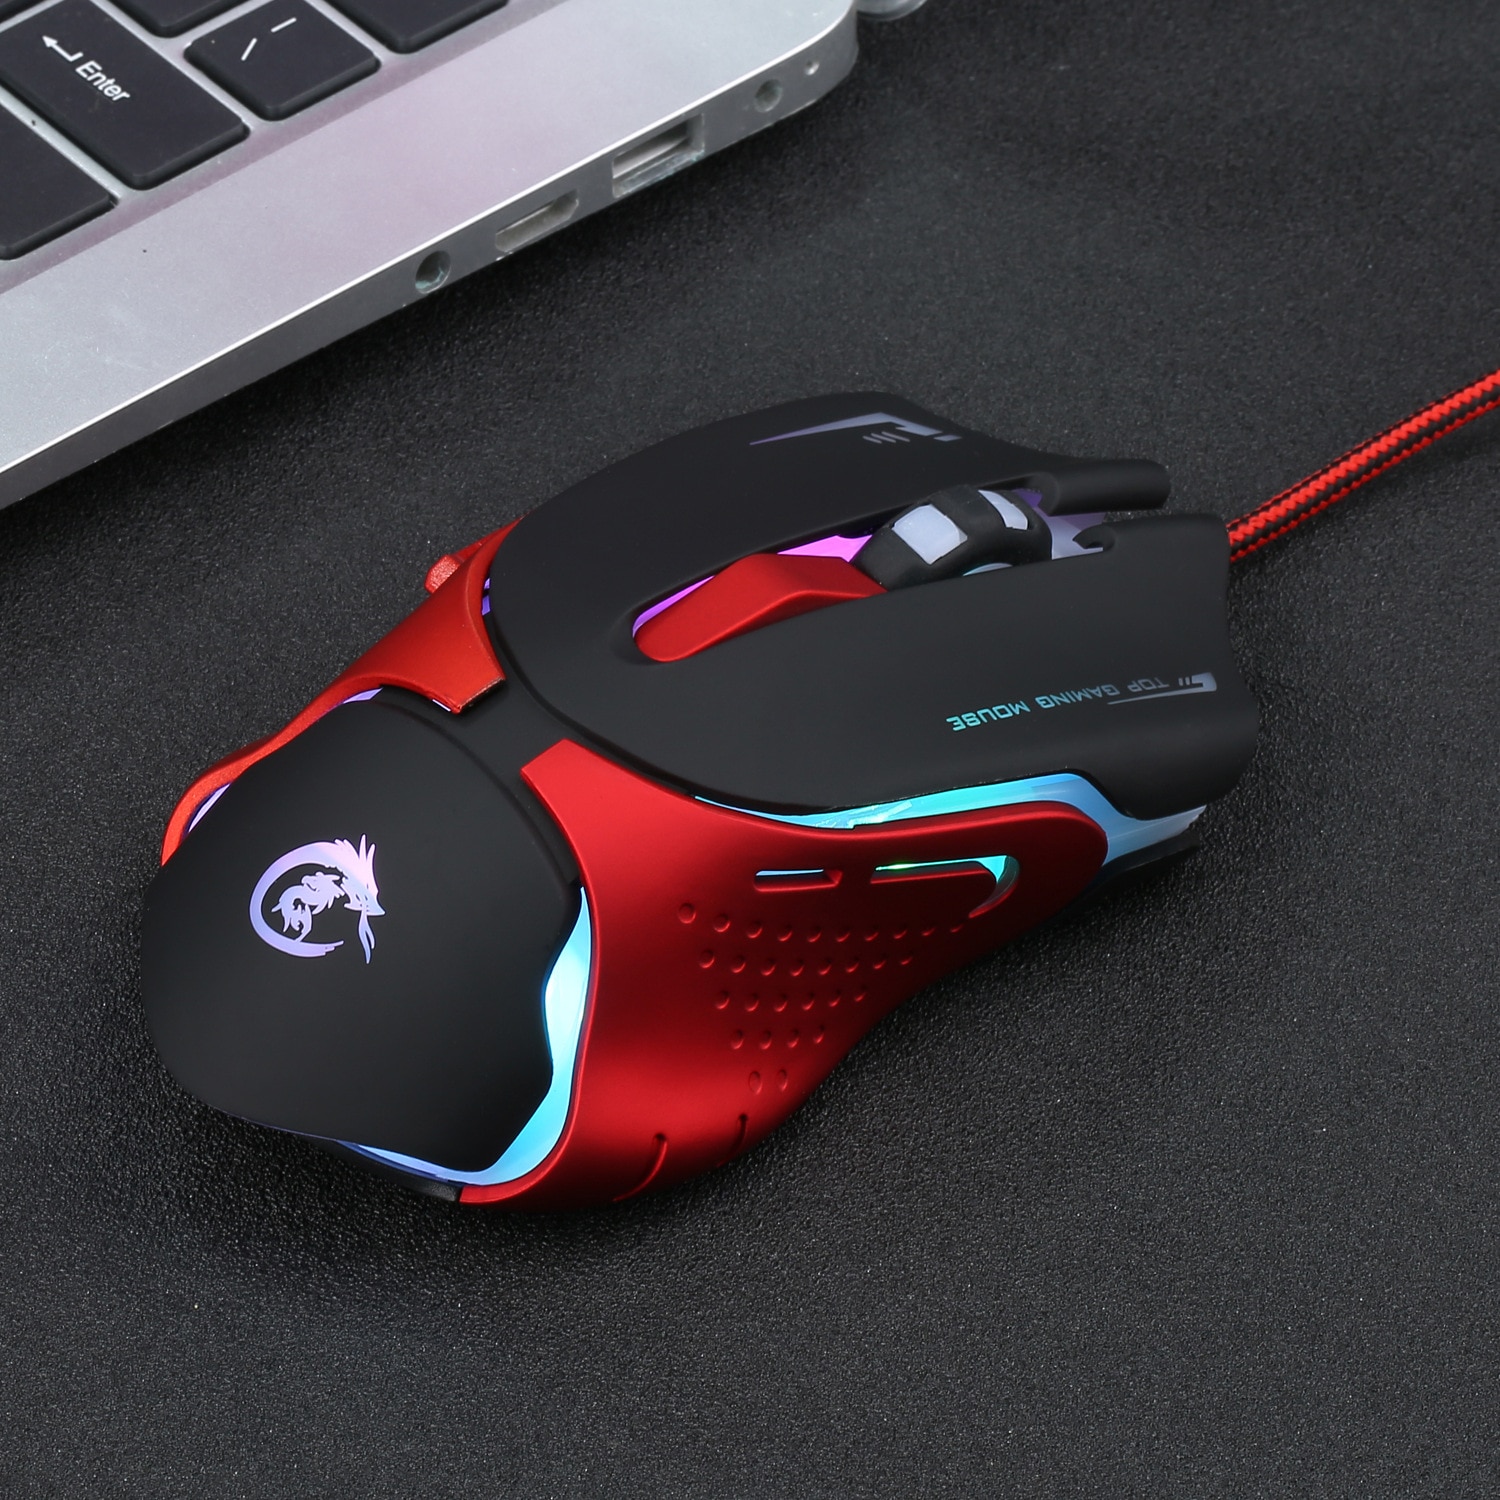 SeenDa 3200DPI Gaming Mouse 6 Buttons LED Optical Pro Mouse Gamer Computer Mice for PC Laptop Games Mice